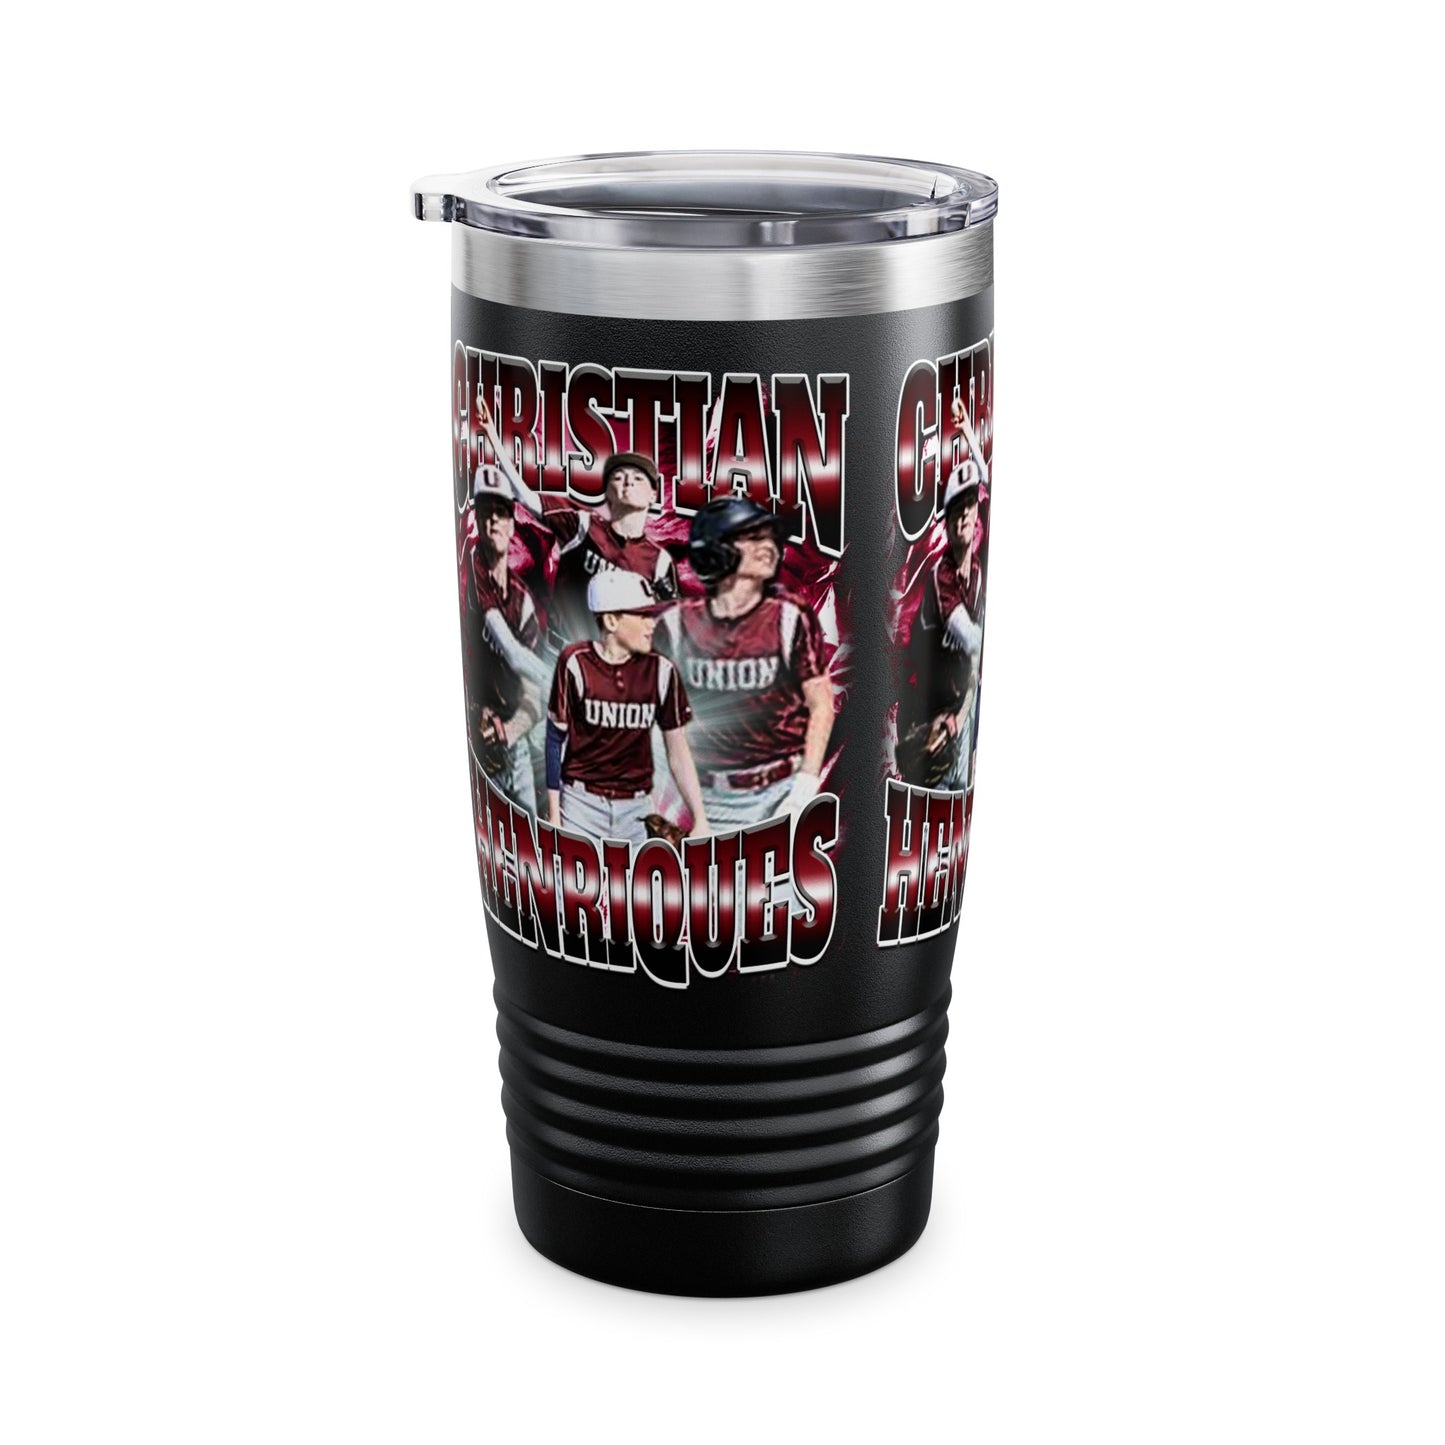 Christian Henriques Stainless Steal Tumbler